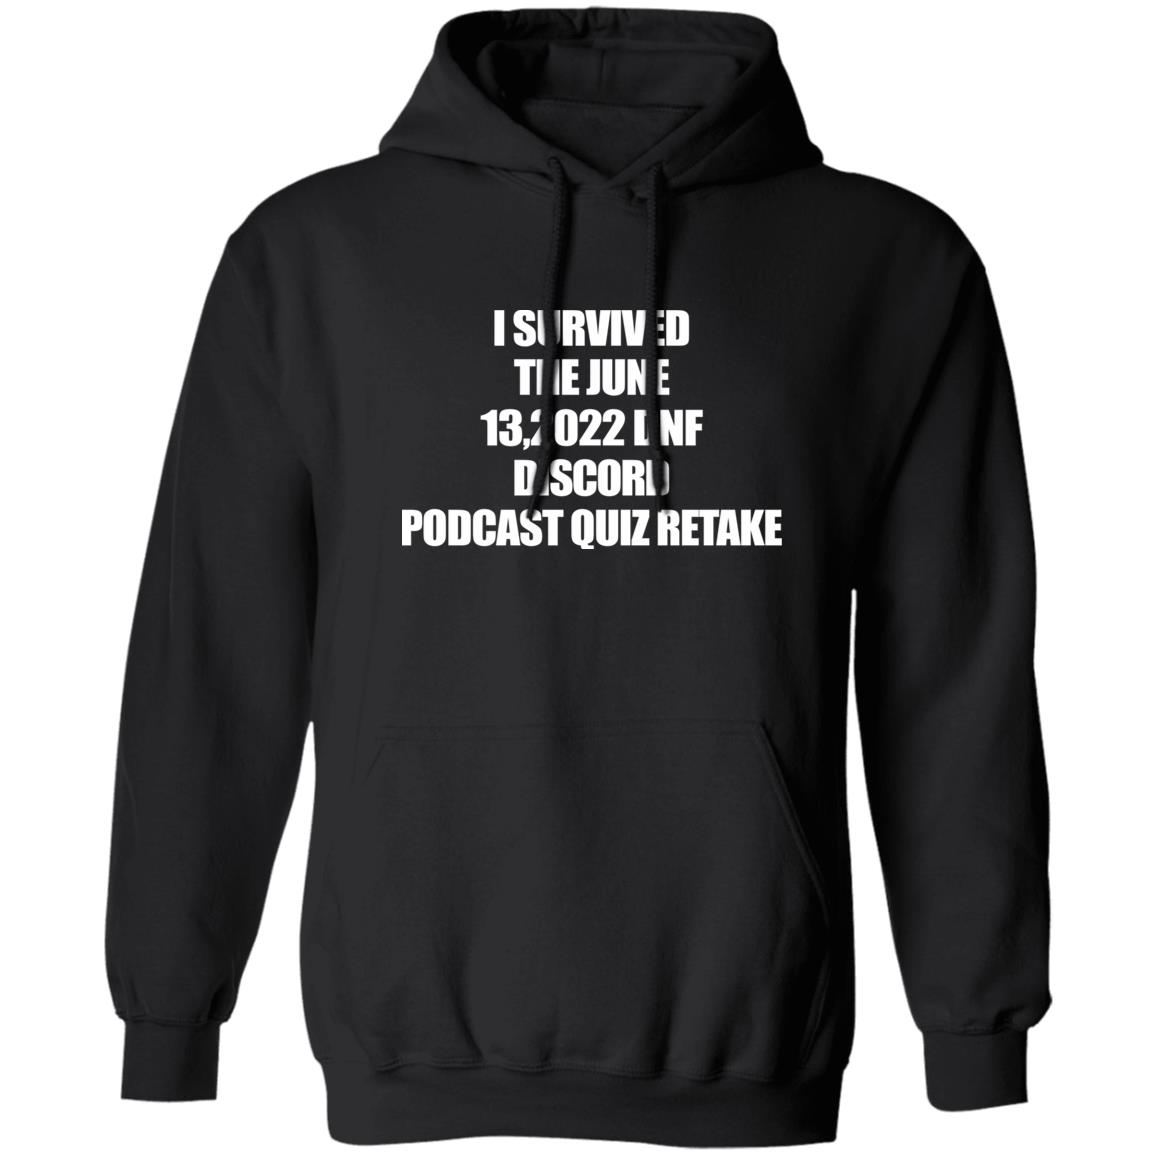 I Survived The June 13 2022 Dnf Discord Podcast Quiz Retake Shirt 1